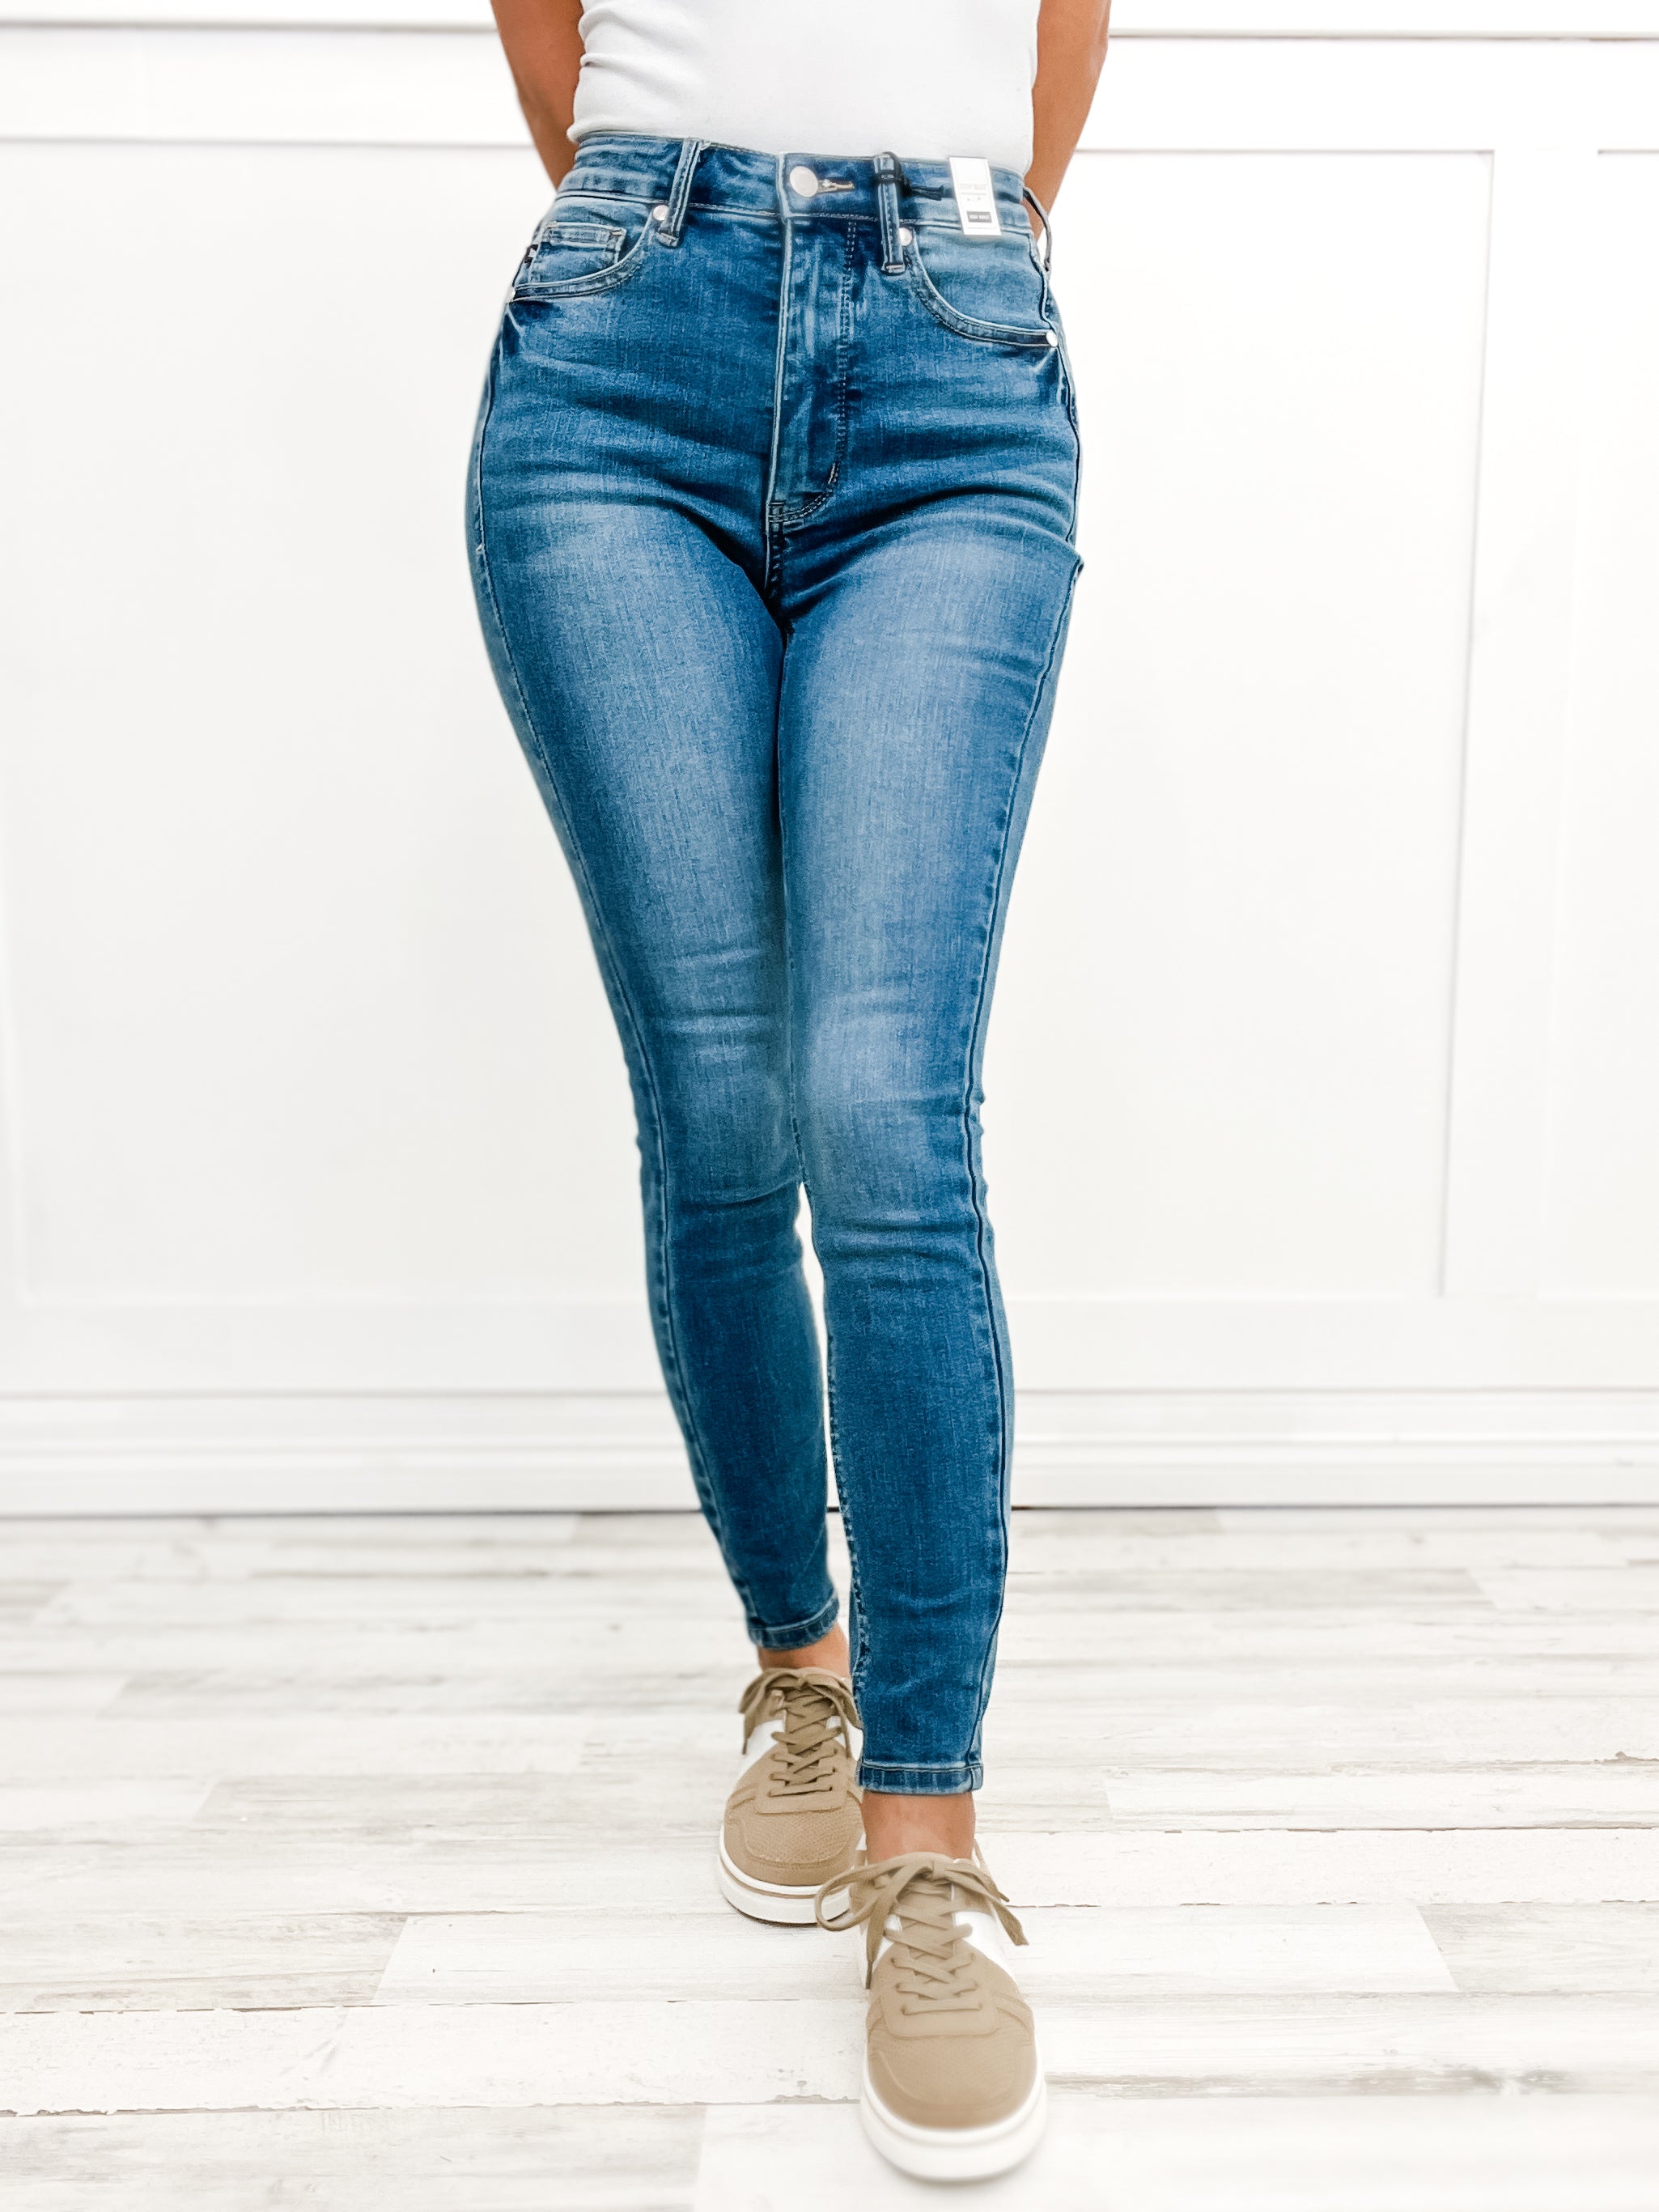 Skinny Fit Denim Collection From Emma Lou's Boutique